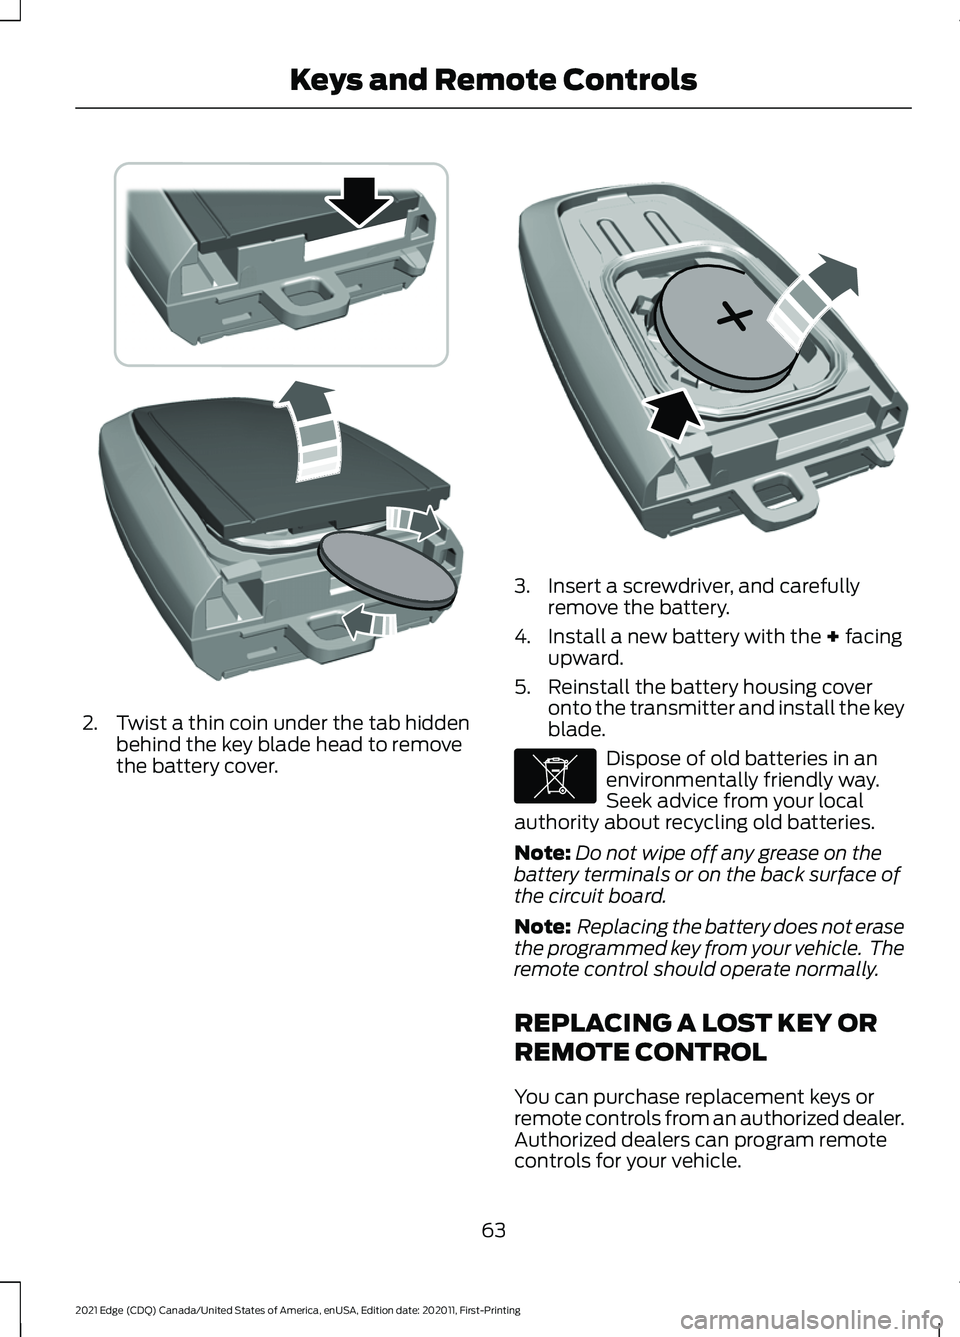 FORD EDGE 2021  Owners Manual 2. Twist a thin coin under the tab hidden
behind the key blade head to remove
the battery cover. 3. Insert a screwdriver, and carefully
remove the battery.
4. Install a new battery with the + facing
u